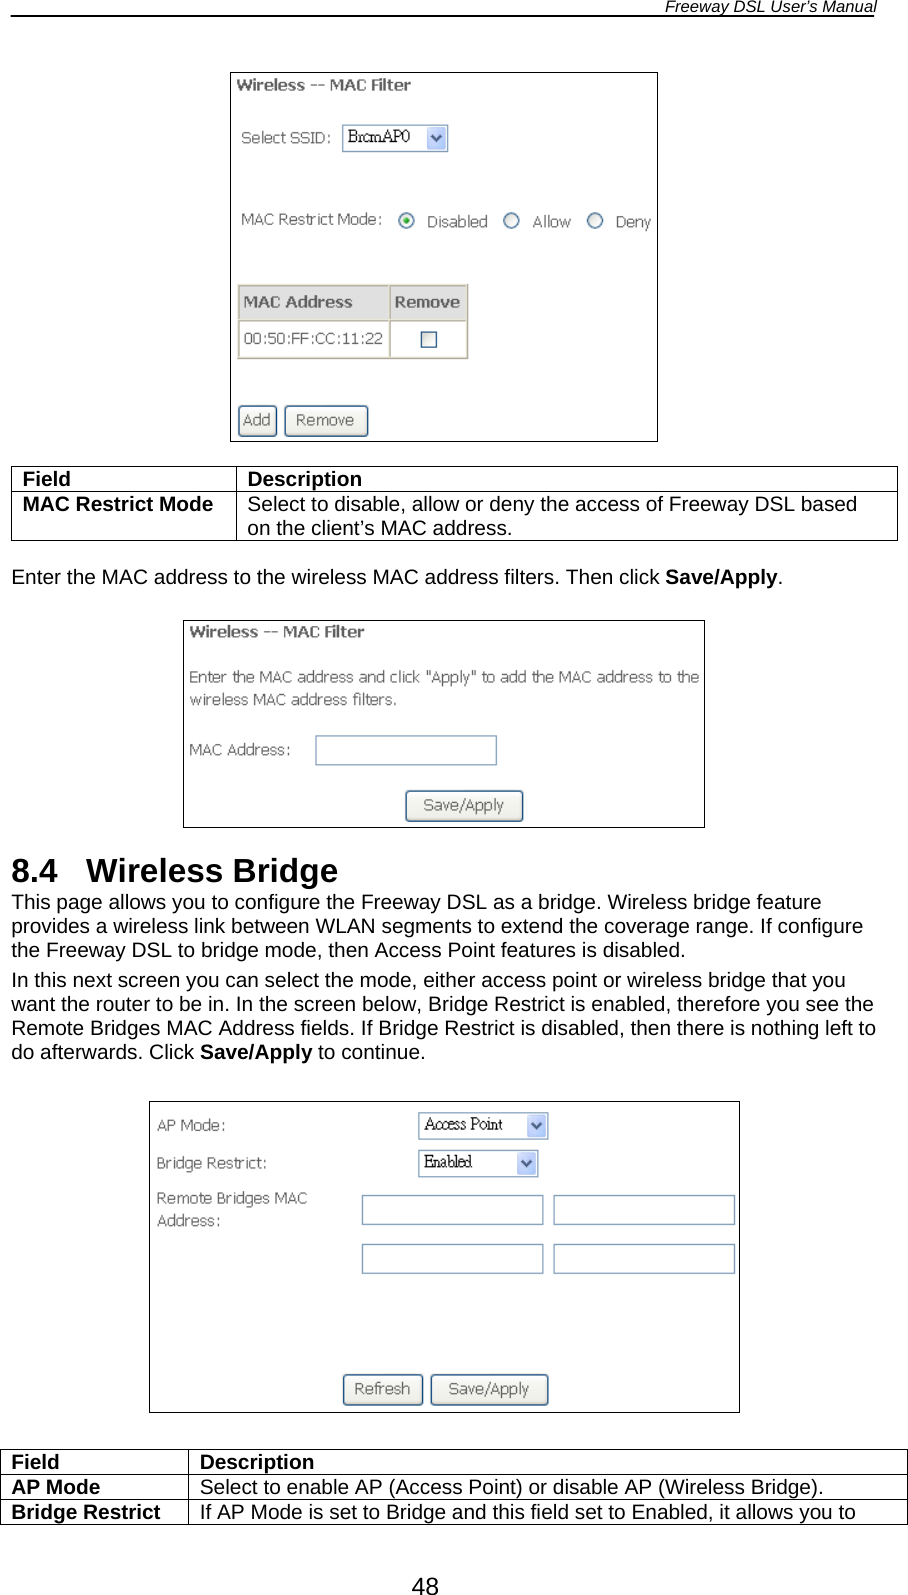 Freeway DSL User’s Manual  48   Field Description MAC Restrict Mode  Select to disable, allow or deny the access of Freeway DSL based on the client’s MAC address.  Enter the MAC address to the wireless MAC address filters. Then click Save/Apply.    8.4 Wireless Bridge This page allows you to configure the Freeway DSL as a bridge. Wireless bridge feature provides a wireless link between WLAN segments to extend the coverage range. If configure the Freeway DSL to bridge mode, then Access Point features is disabled. In this next screen you can select the mode, either access point or wireless bridge that you want the router to be in. In the screen below, Bridge Restrict is enabled, therefore you see the Remote Bridges MAC Address fields. If Bridge Restrict is disabled, then there is nothing left to do afterwards. Click Save/Apply to continue.    Field Description AP Mode  Select to enable AP (Access Point) or disable AP (Wireless Bridge). Bridge Restrict  If AP Mode is set to Bridge and this field set to Enabled, it allows you to 